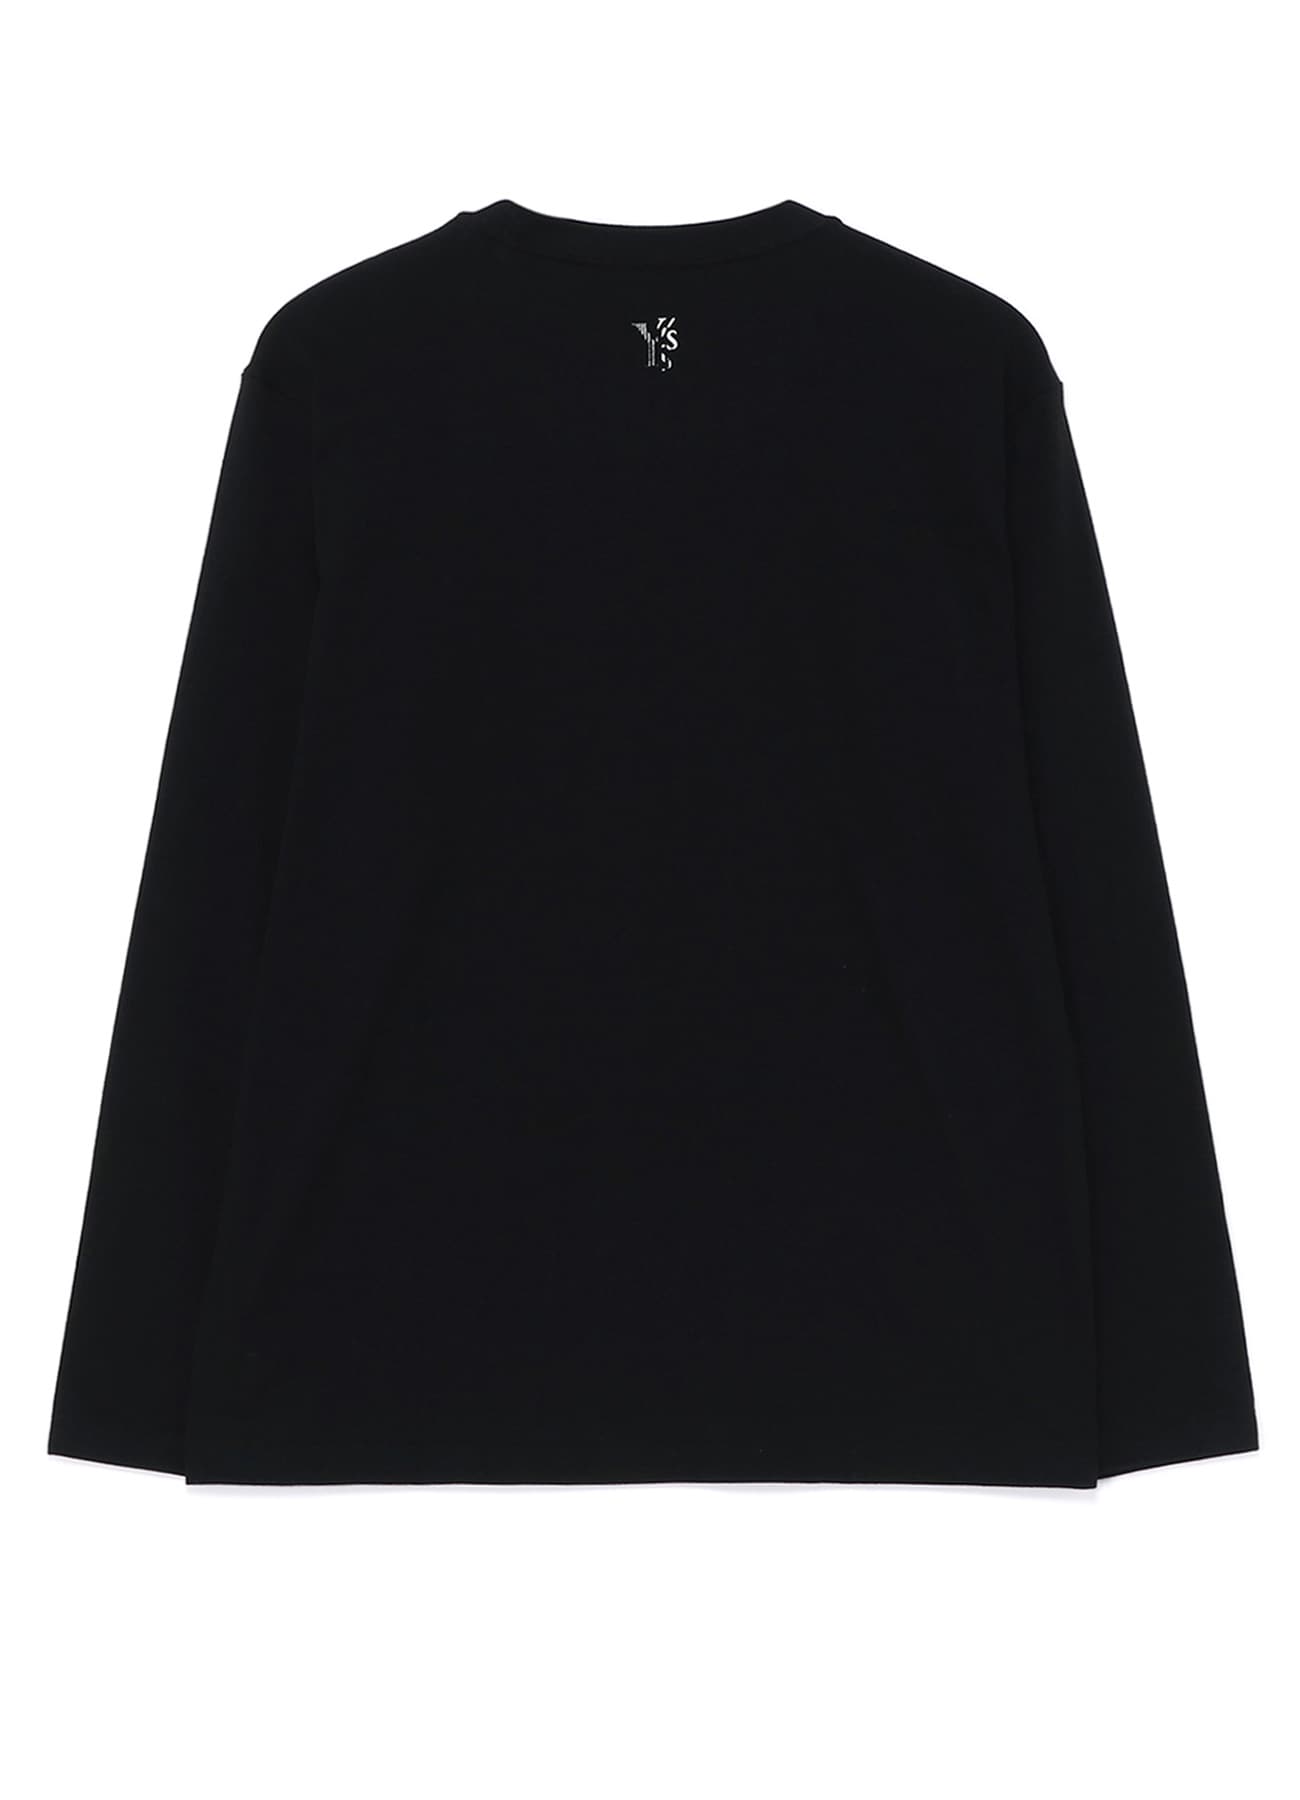 Y's x MAX VADUKUL]PICTURE PIGMENT LONG SLEEVE T-SHIRTS(S Black 